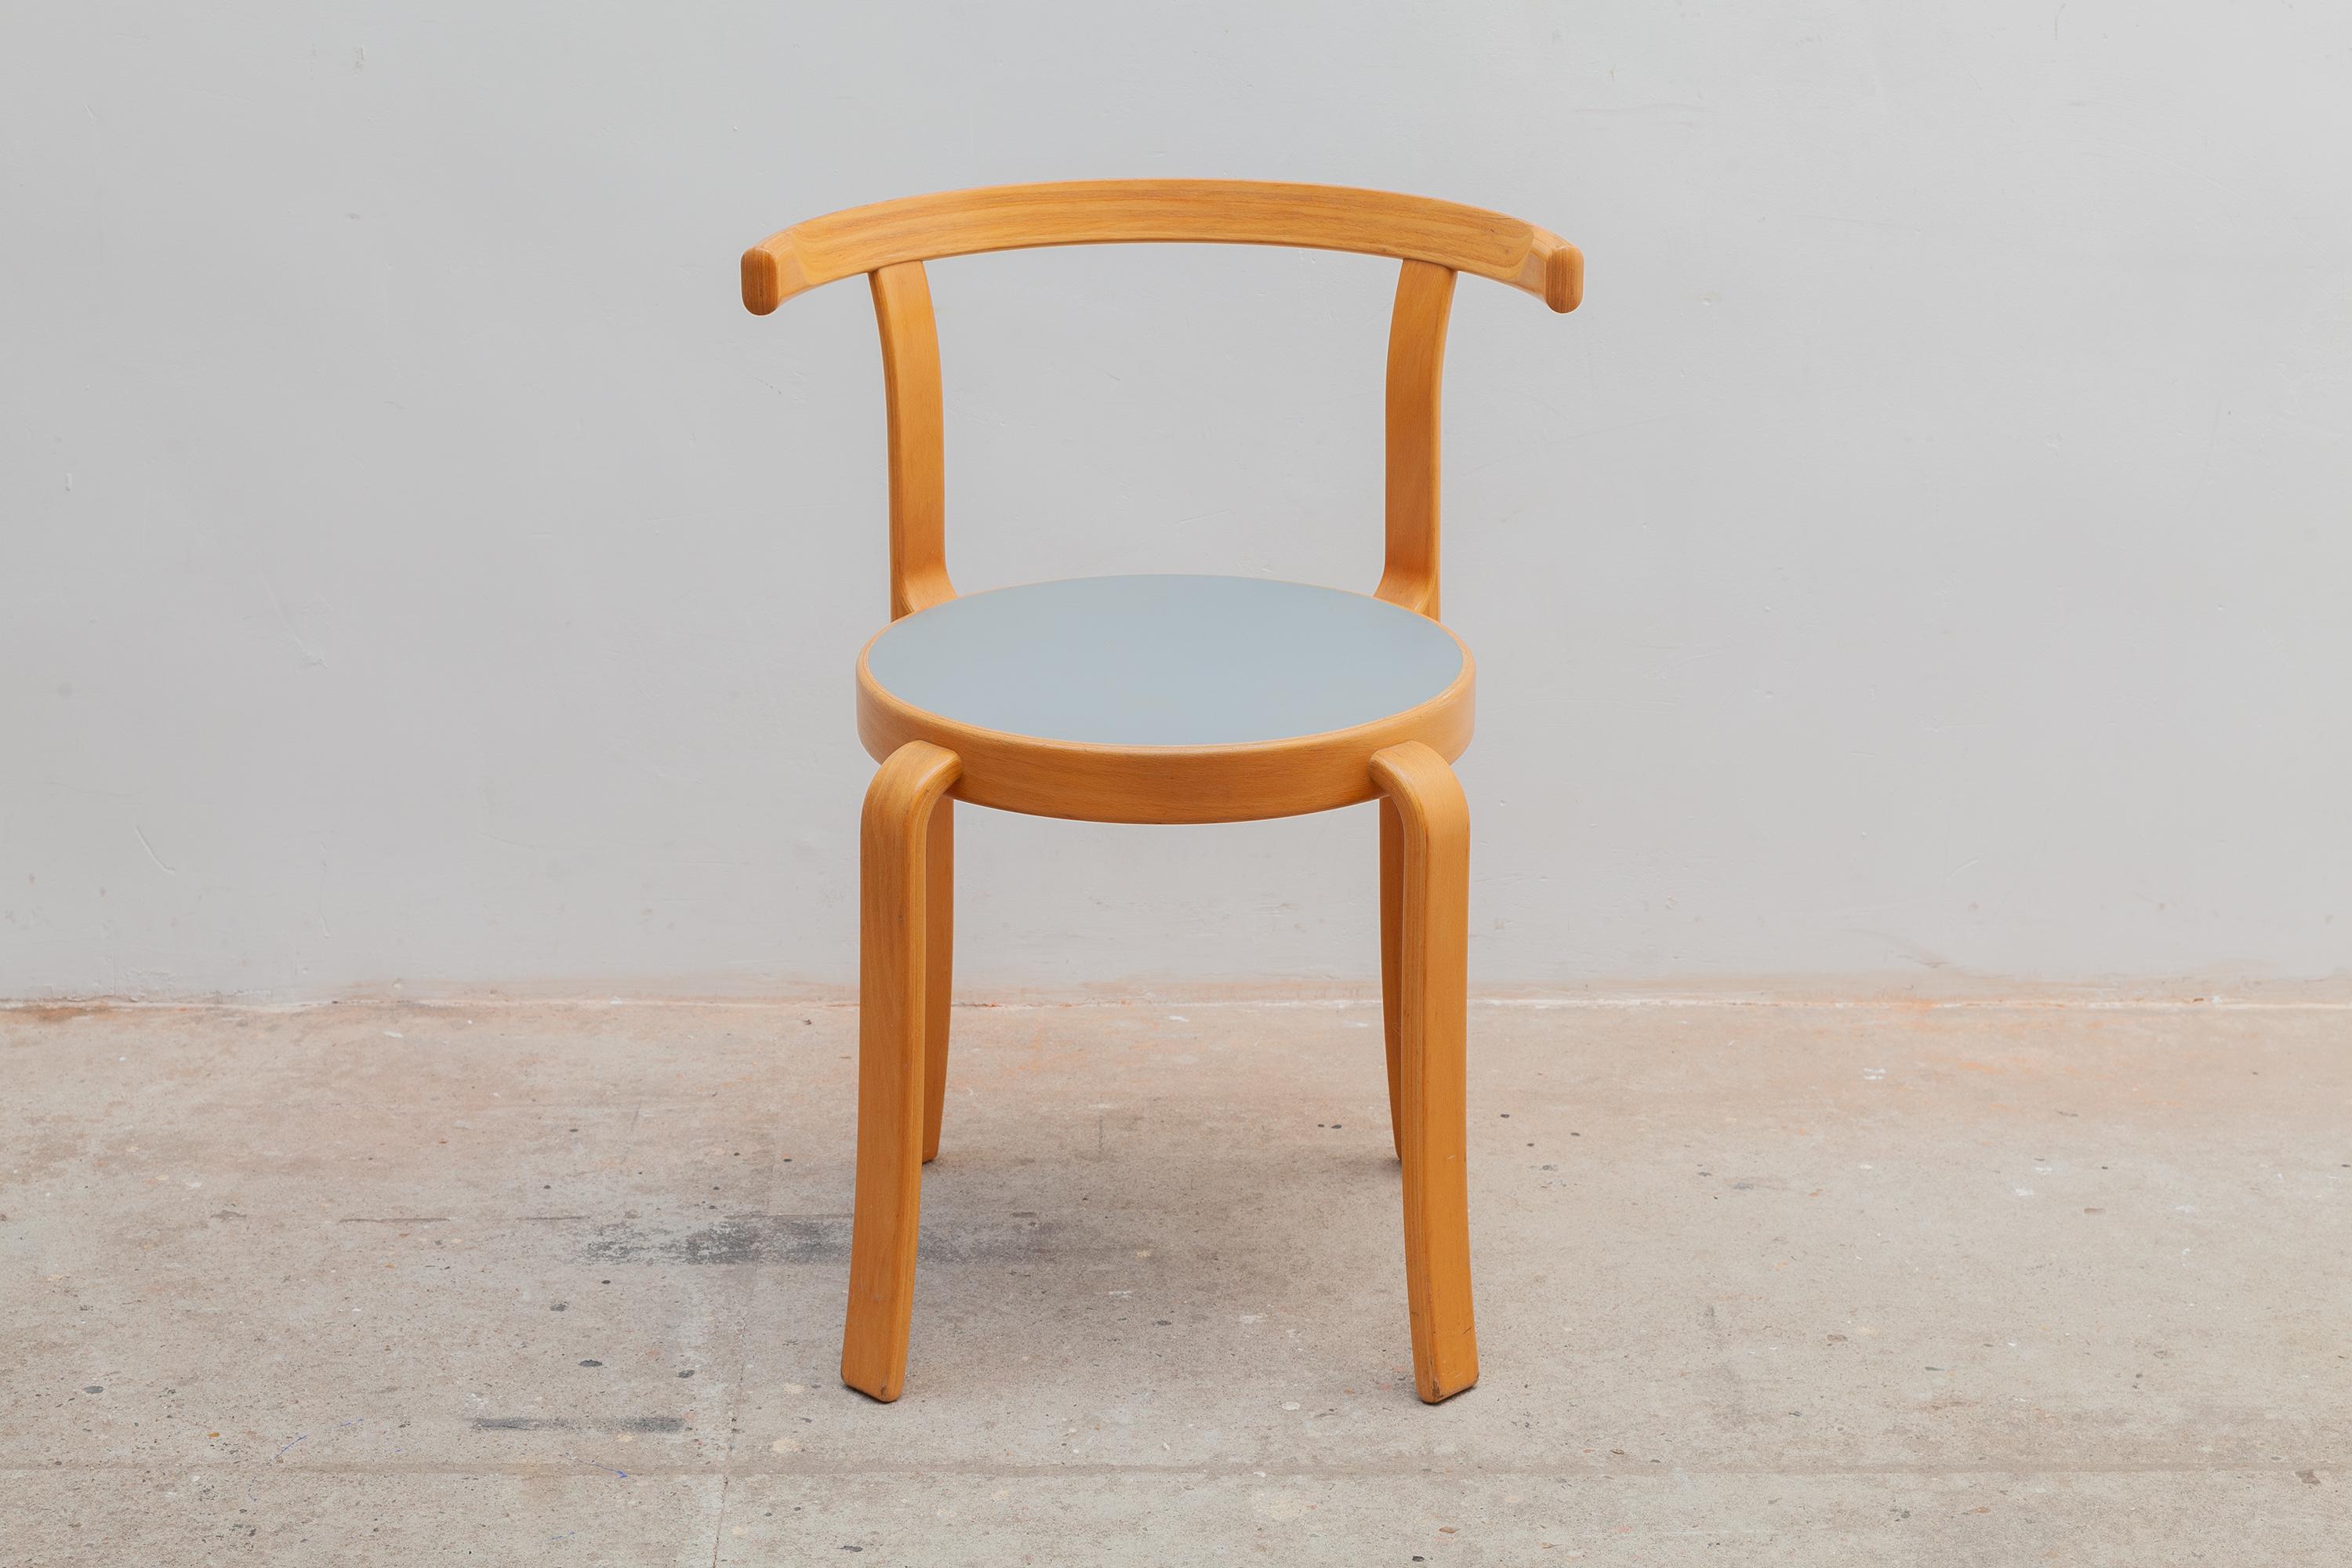 Vintage 8000 series four chairs by Magnus Olsen, Denmark. Stylish curved wooden legs and chair backs with blue-grey top. Vintage patina. Stackable chairs. Dimensions: Chairs: 53 W x 70 H x 44 D cm Seat: 45cm high. Labeled.